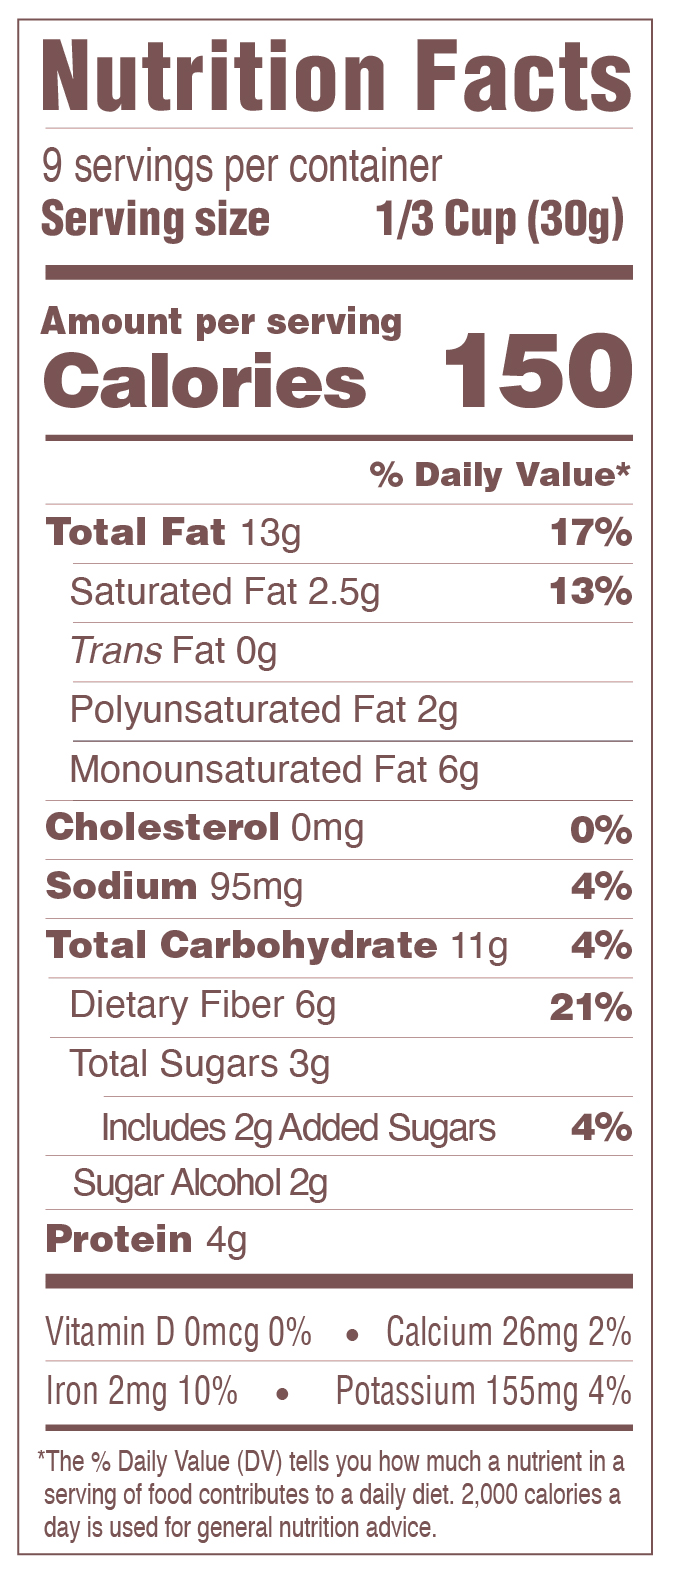 Nutrition Facts - Double Chocolate Crunch